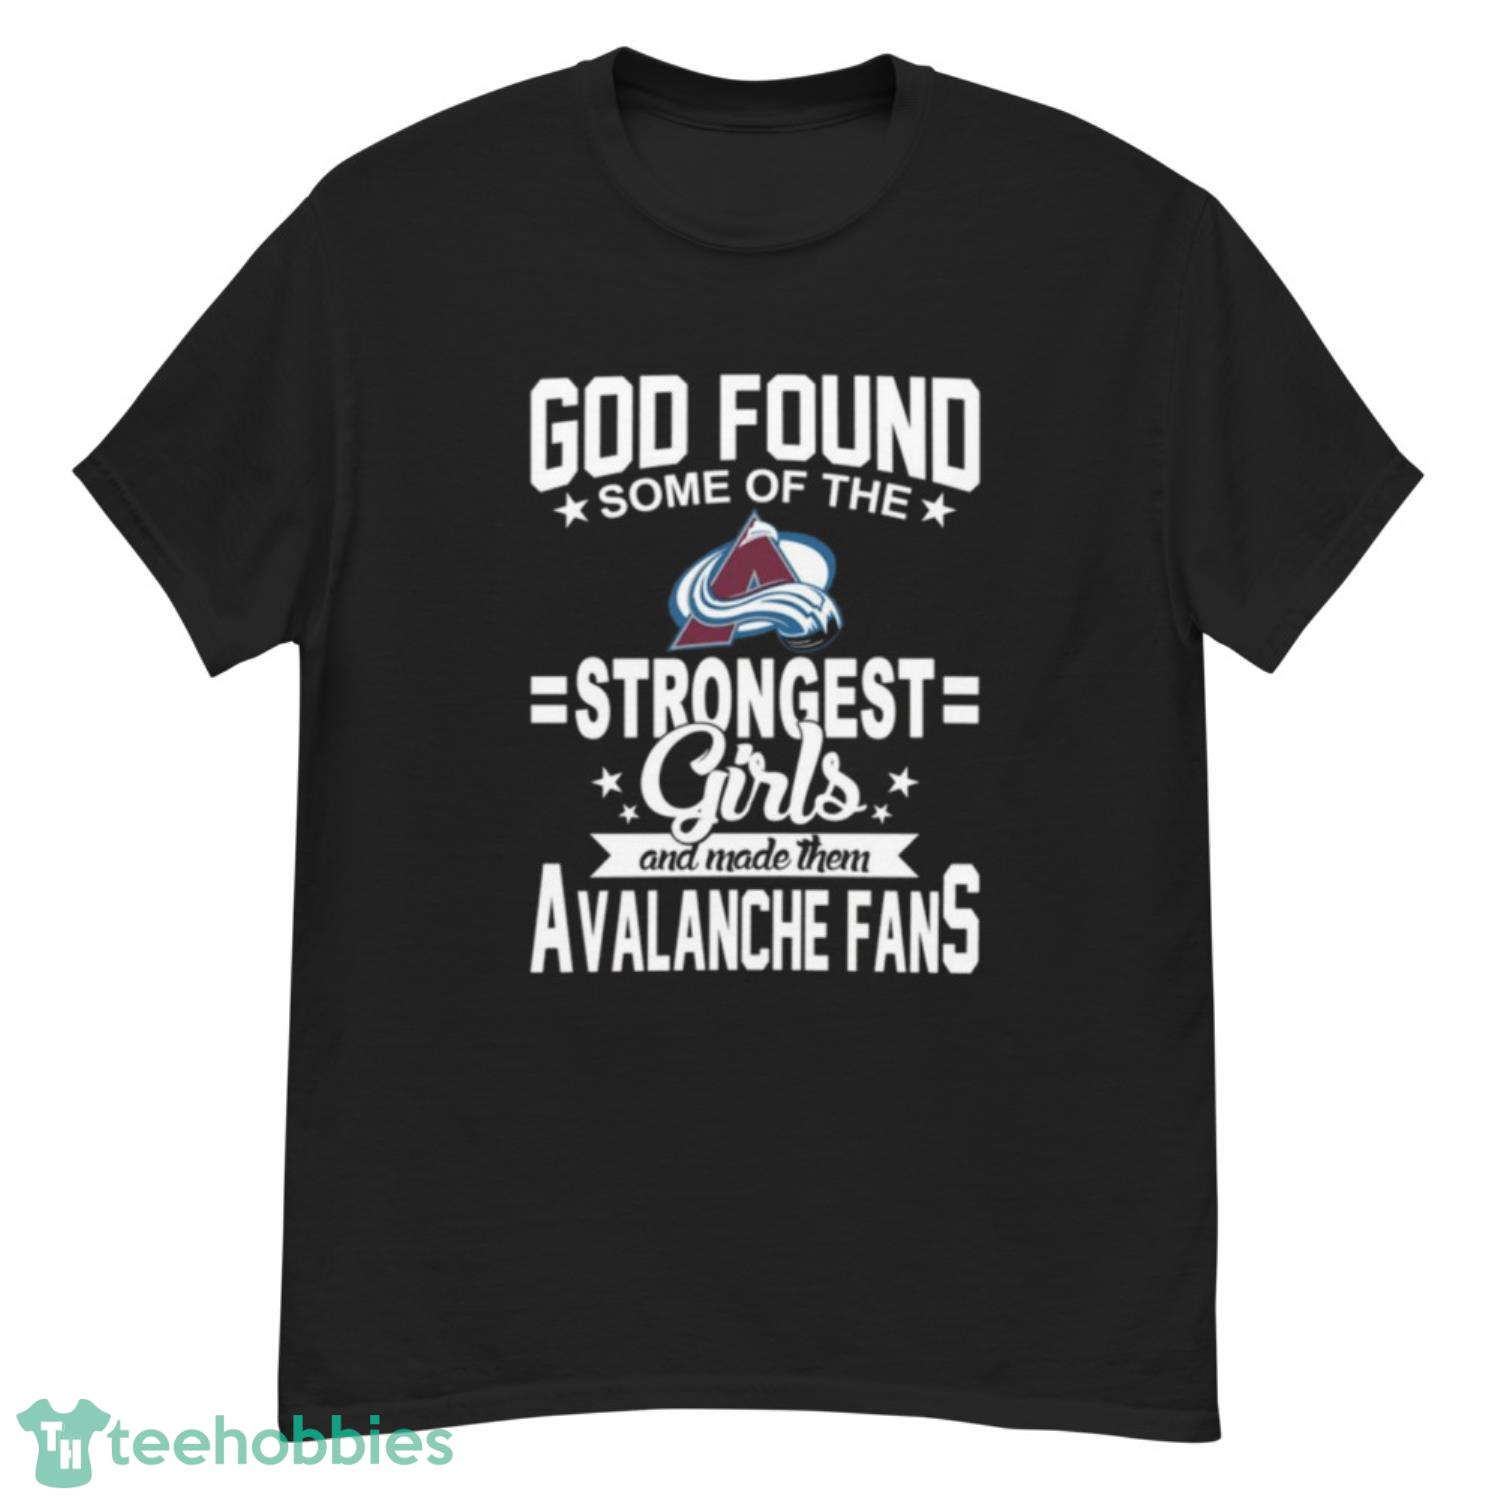 Colorado Avalanche NHL Football God Found Some Of The Strongest Girls Adoring Fans T Shirt - G500 Men’s Classic T-Shirt